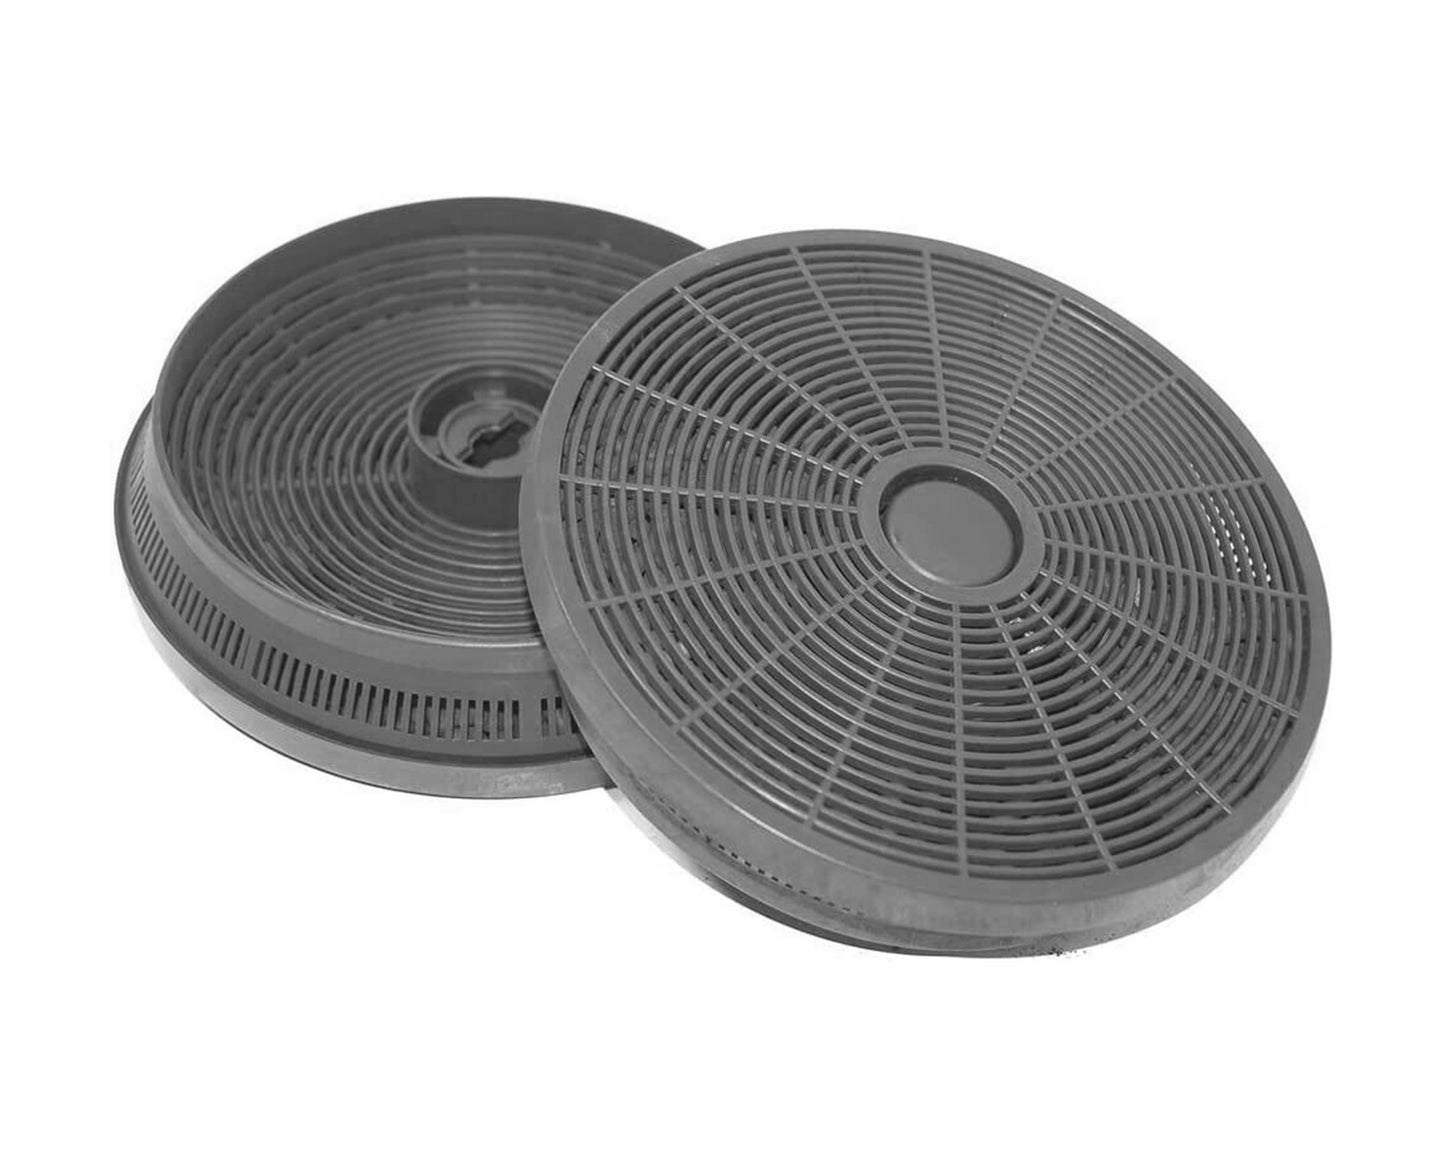 2 Pack Charcoal Carbon Cooker Hood Grease Filters for Glen Dimplex 444448844, 444448843, 444443284 - 082620630